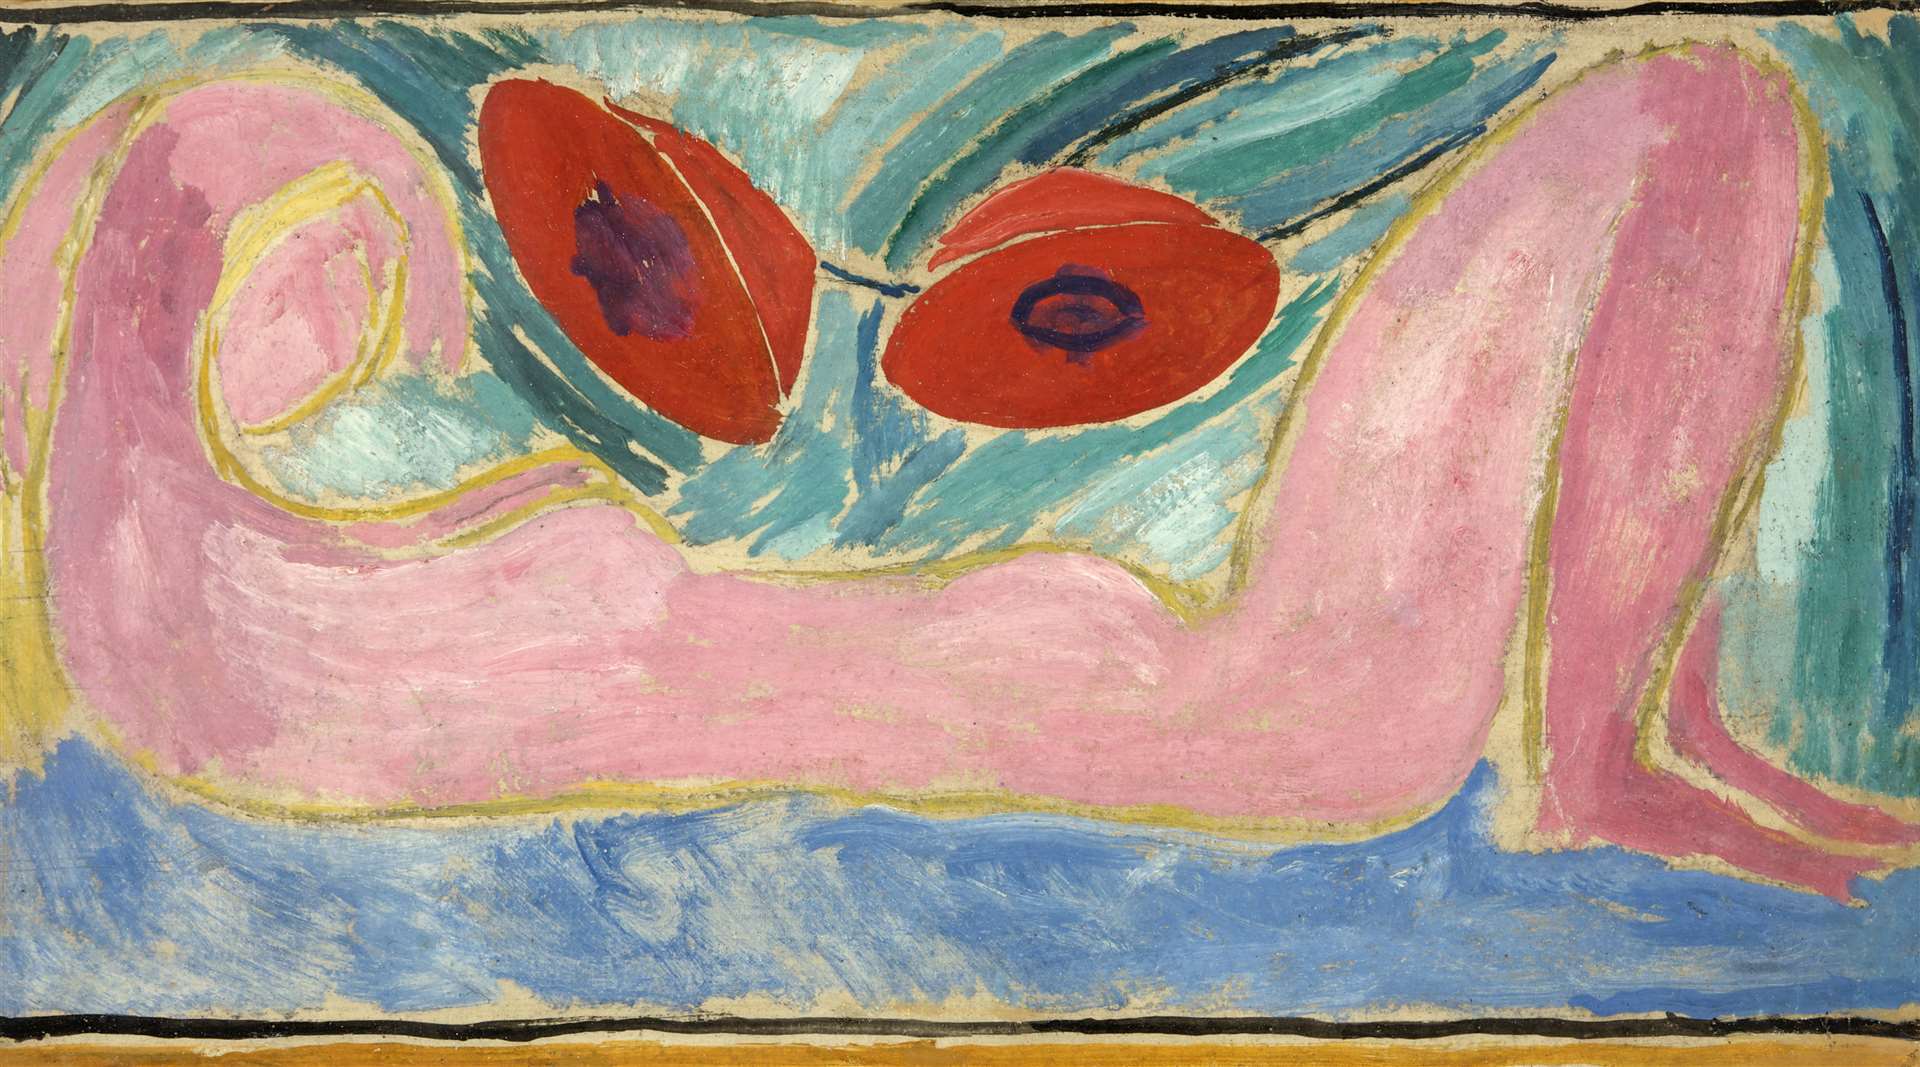 Vanessa Bell’s Nude with Poppies (1916). Supplied by Swindon Museum and Art Gallery